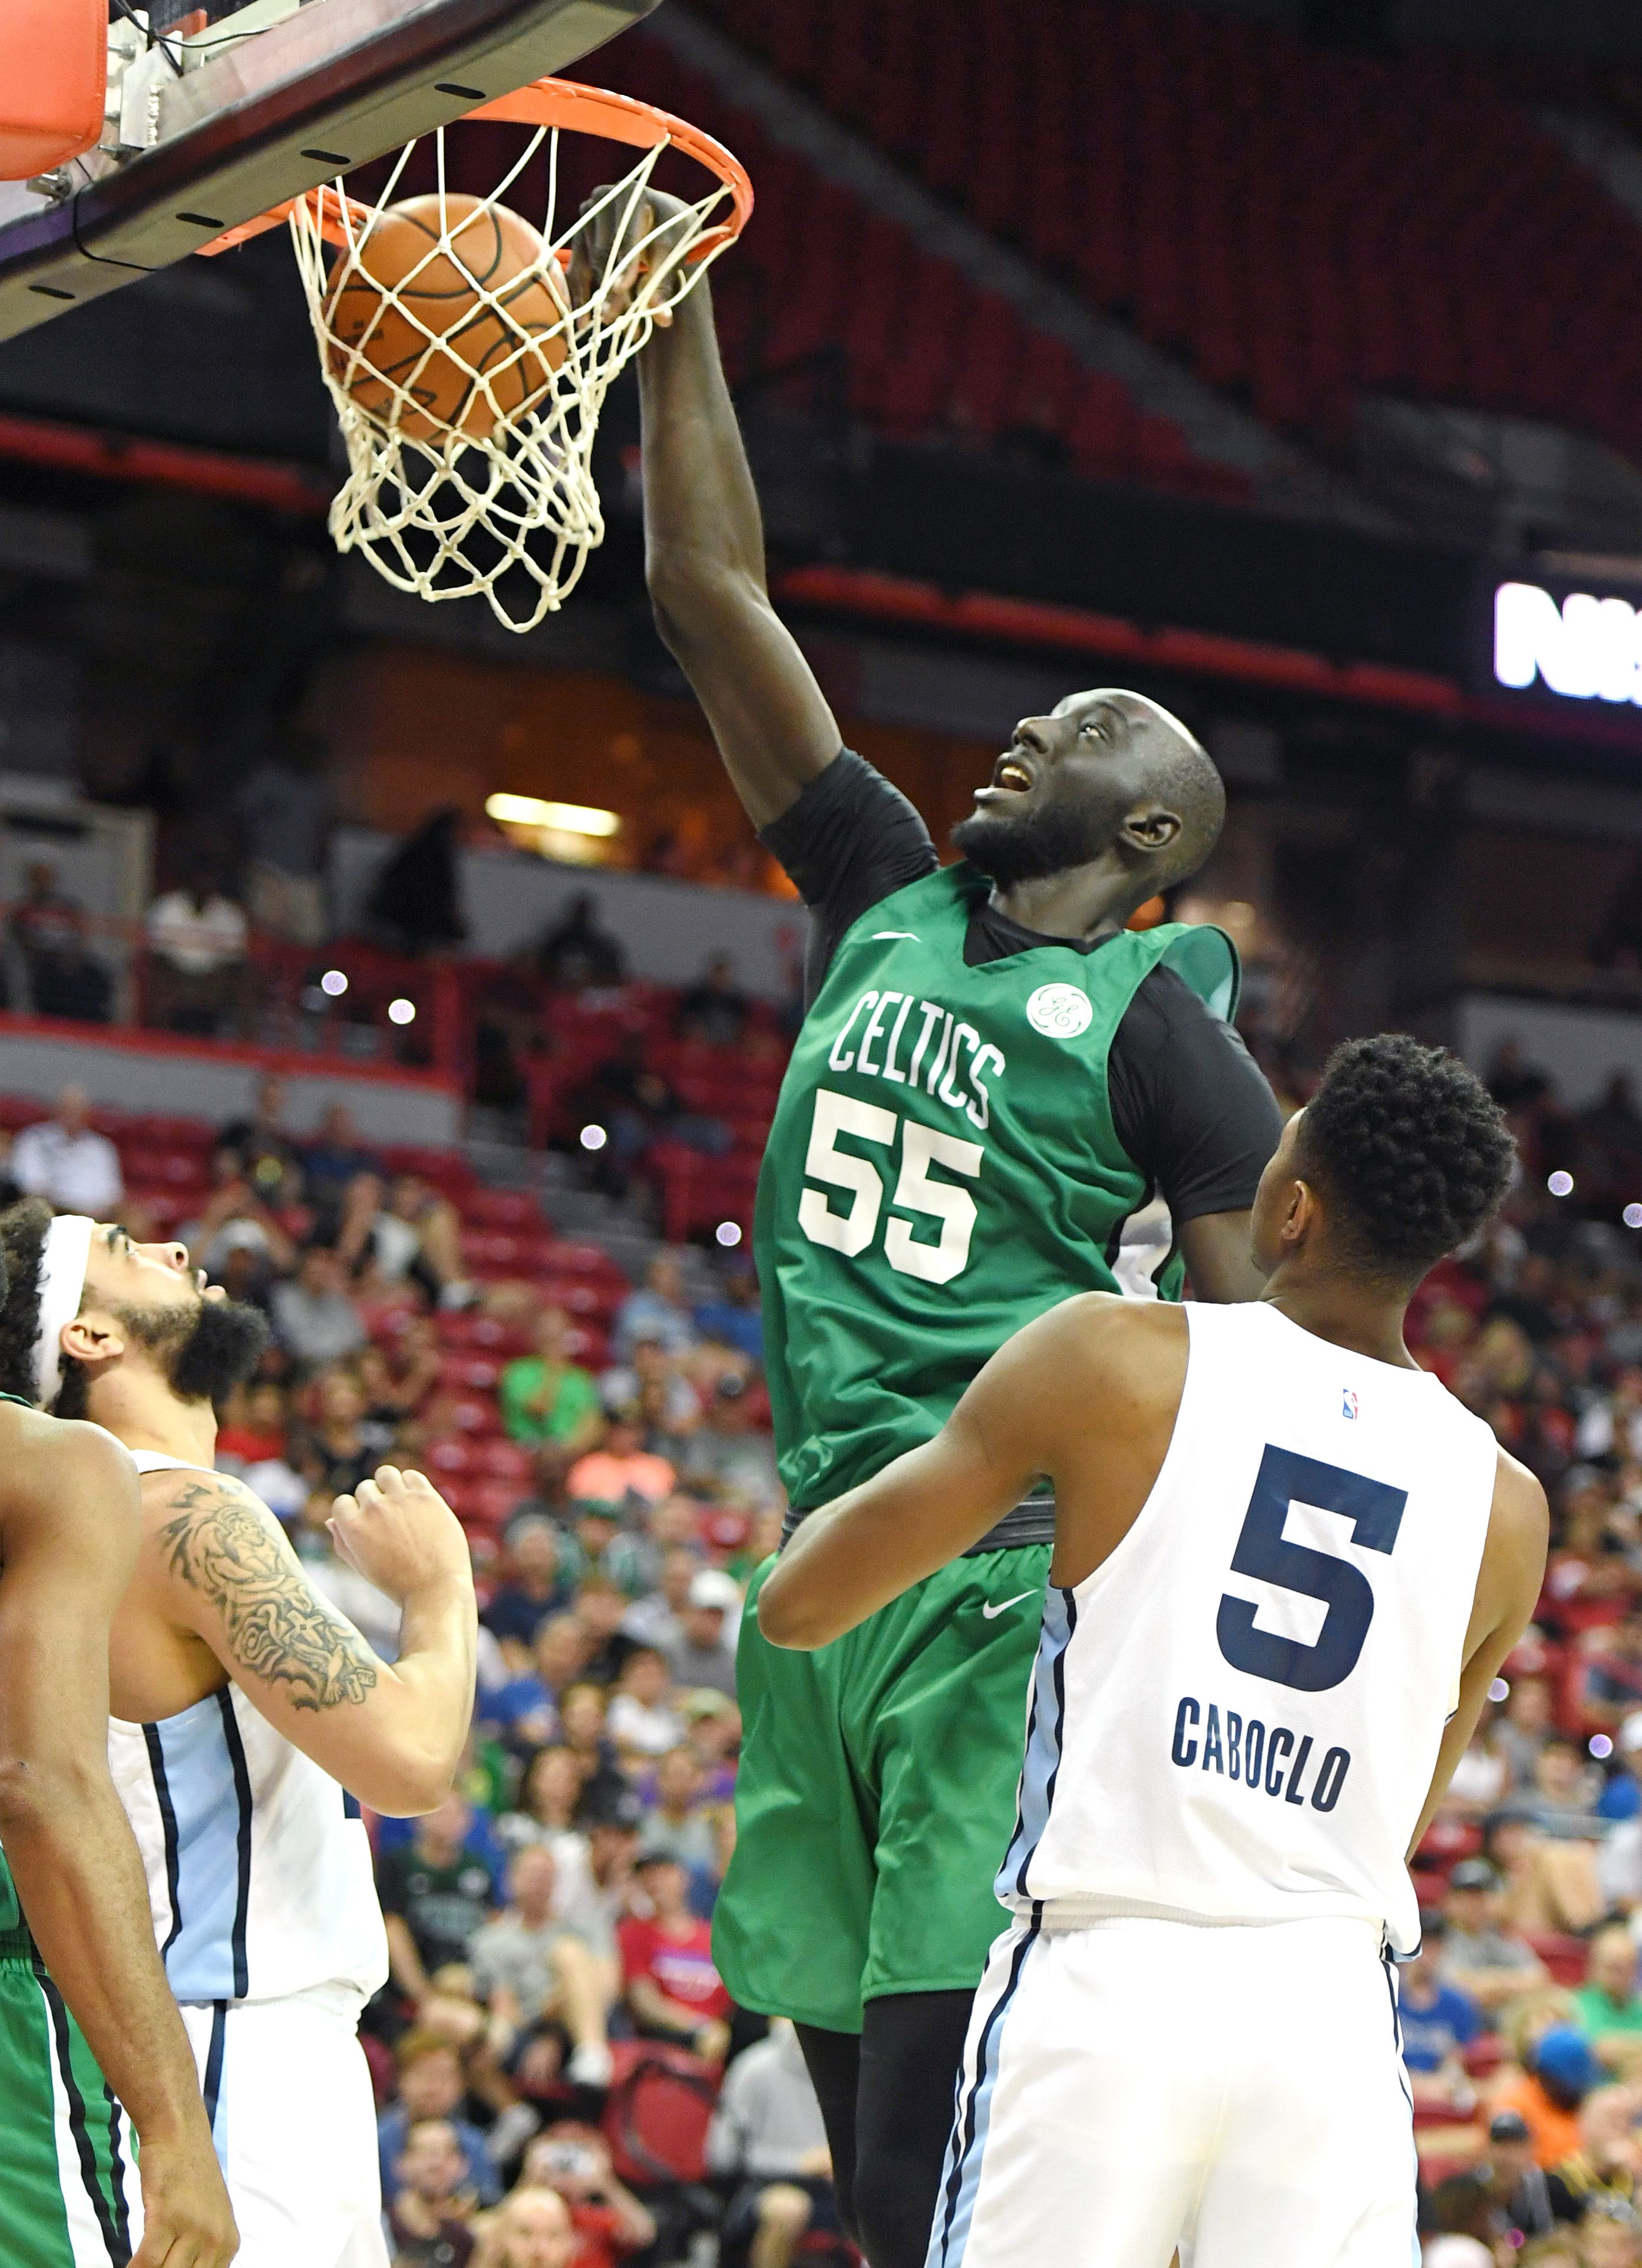 Tacko Fall returning to Celtics, Red Claws on two-way contract